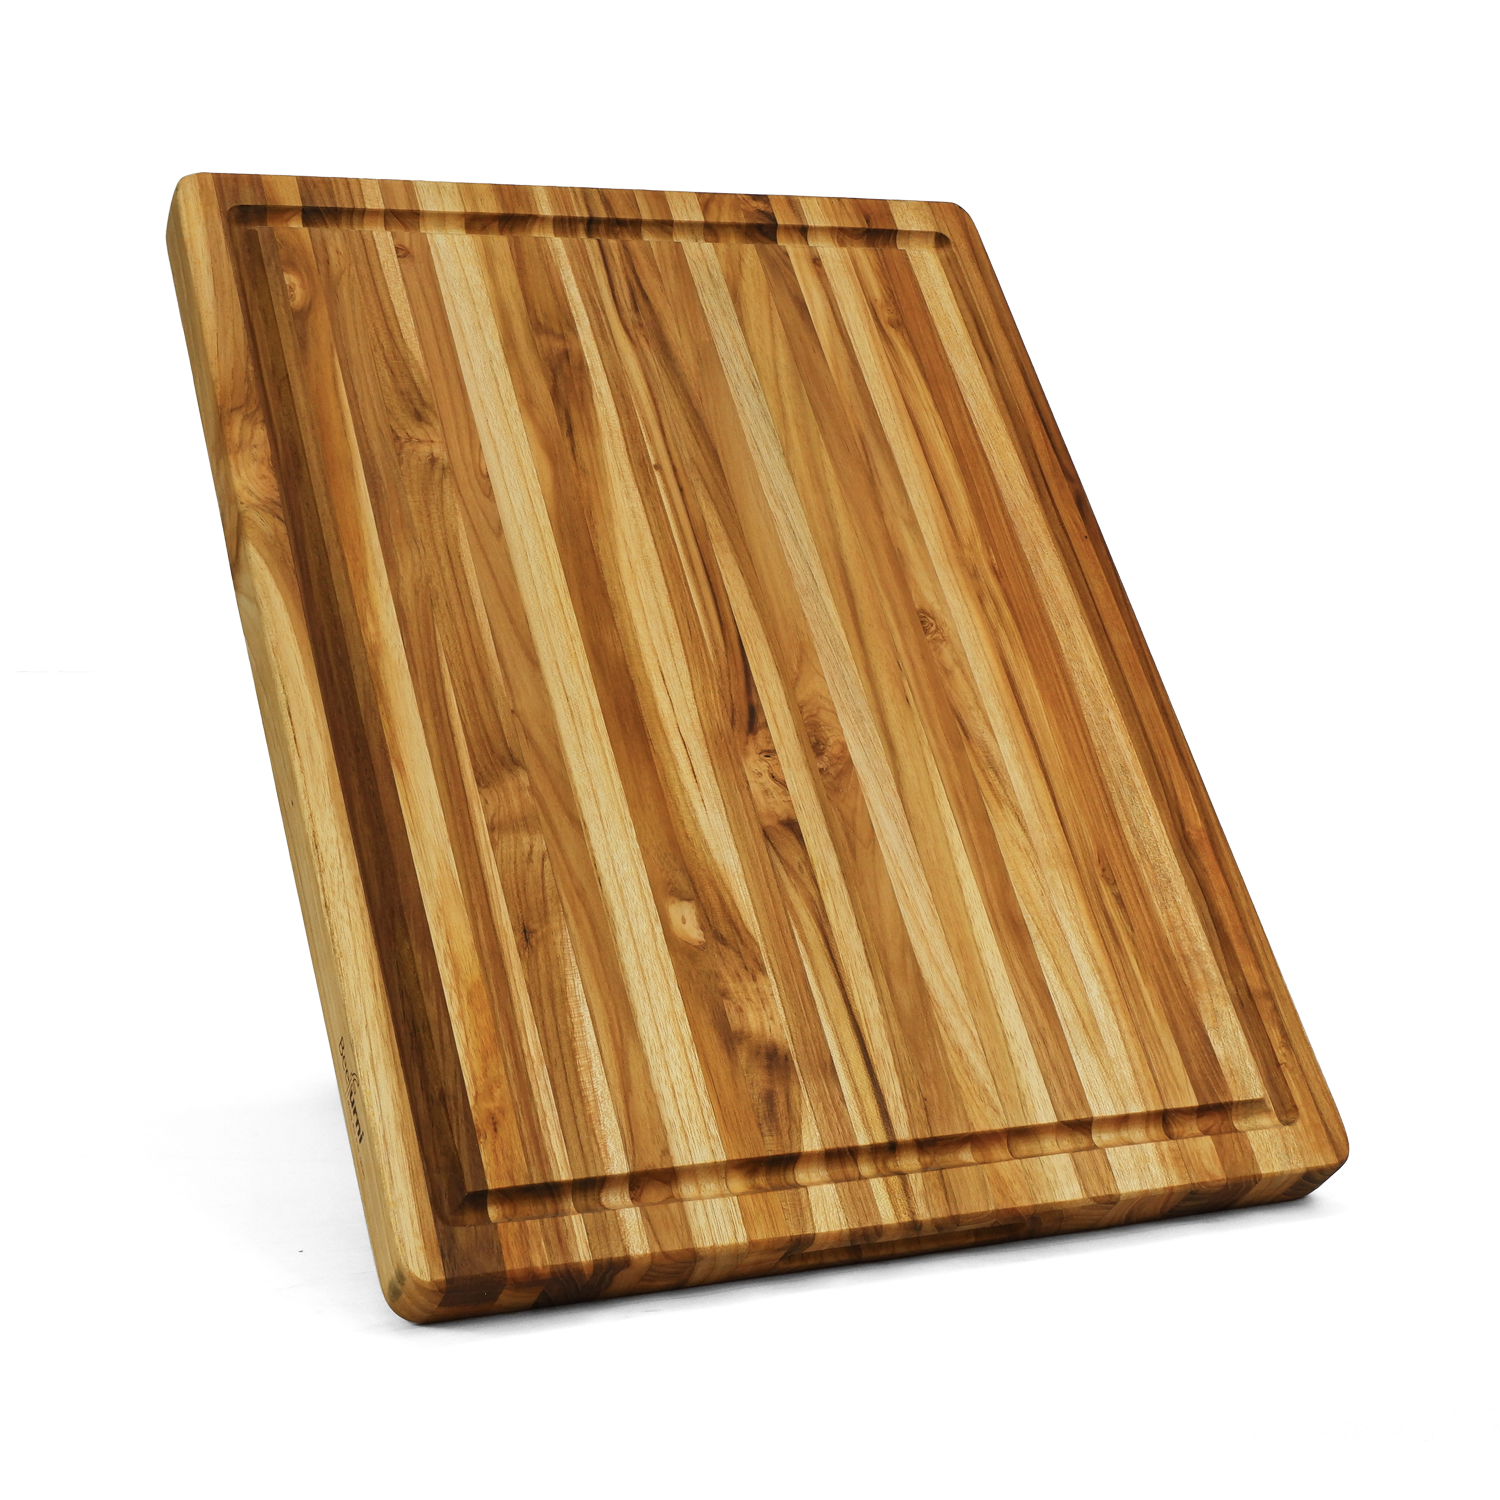 BEEFURNI Rectangular Real Teak Wood Cutting Board With Juice Groove 20 INCH, Pack of 5 pieces-Boyel Living